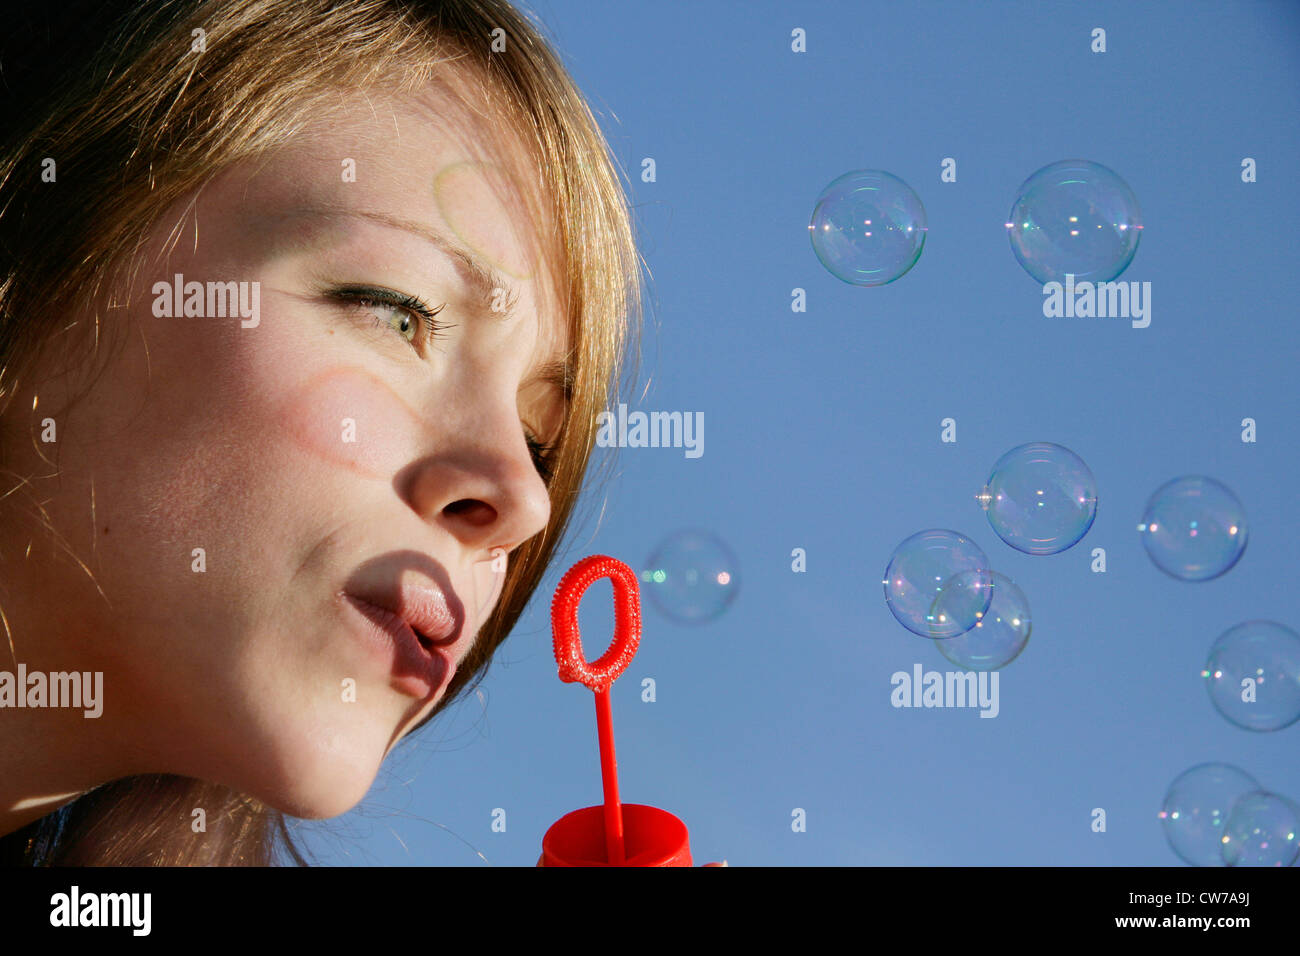 young woman blowing bubbles Stock Photo